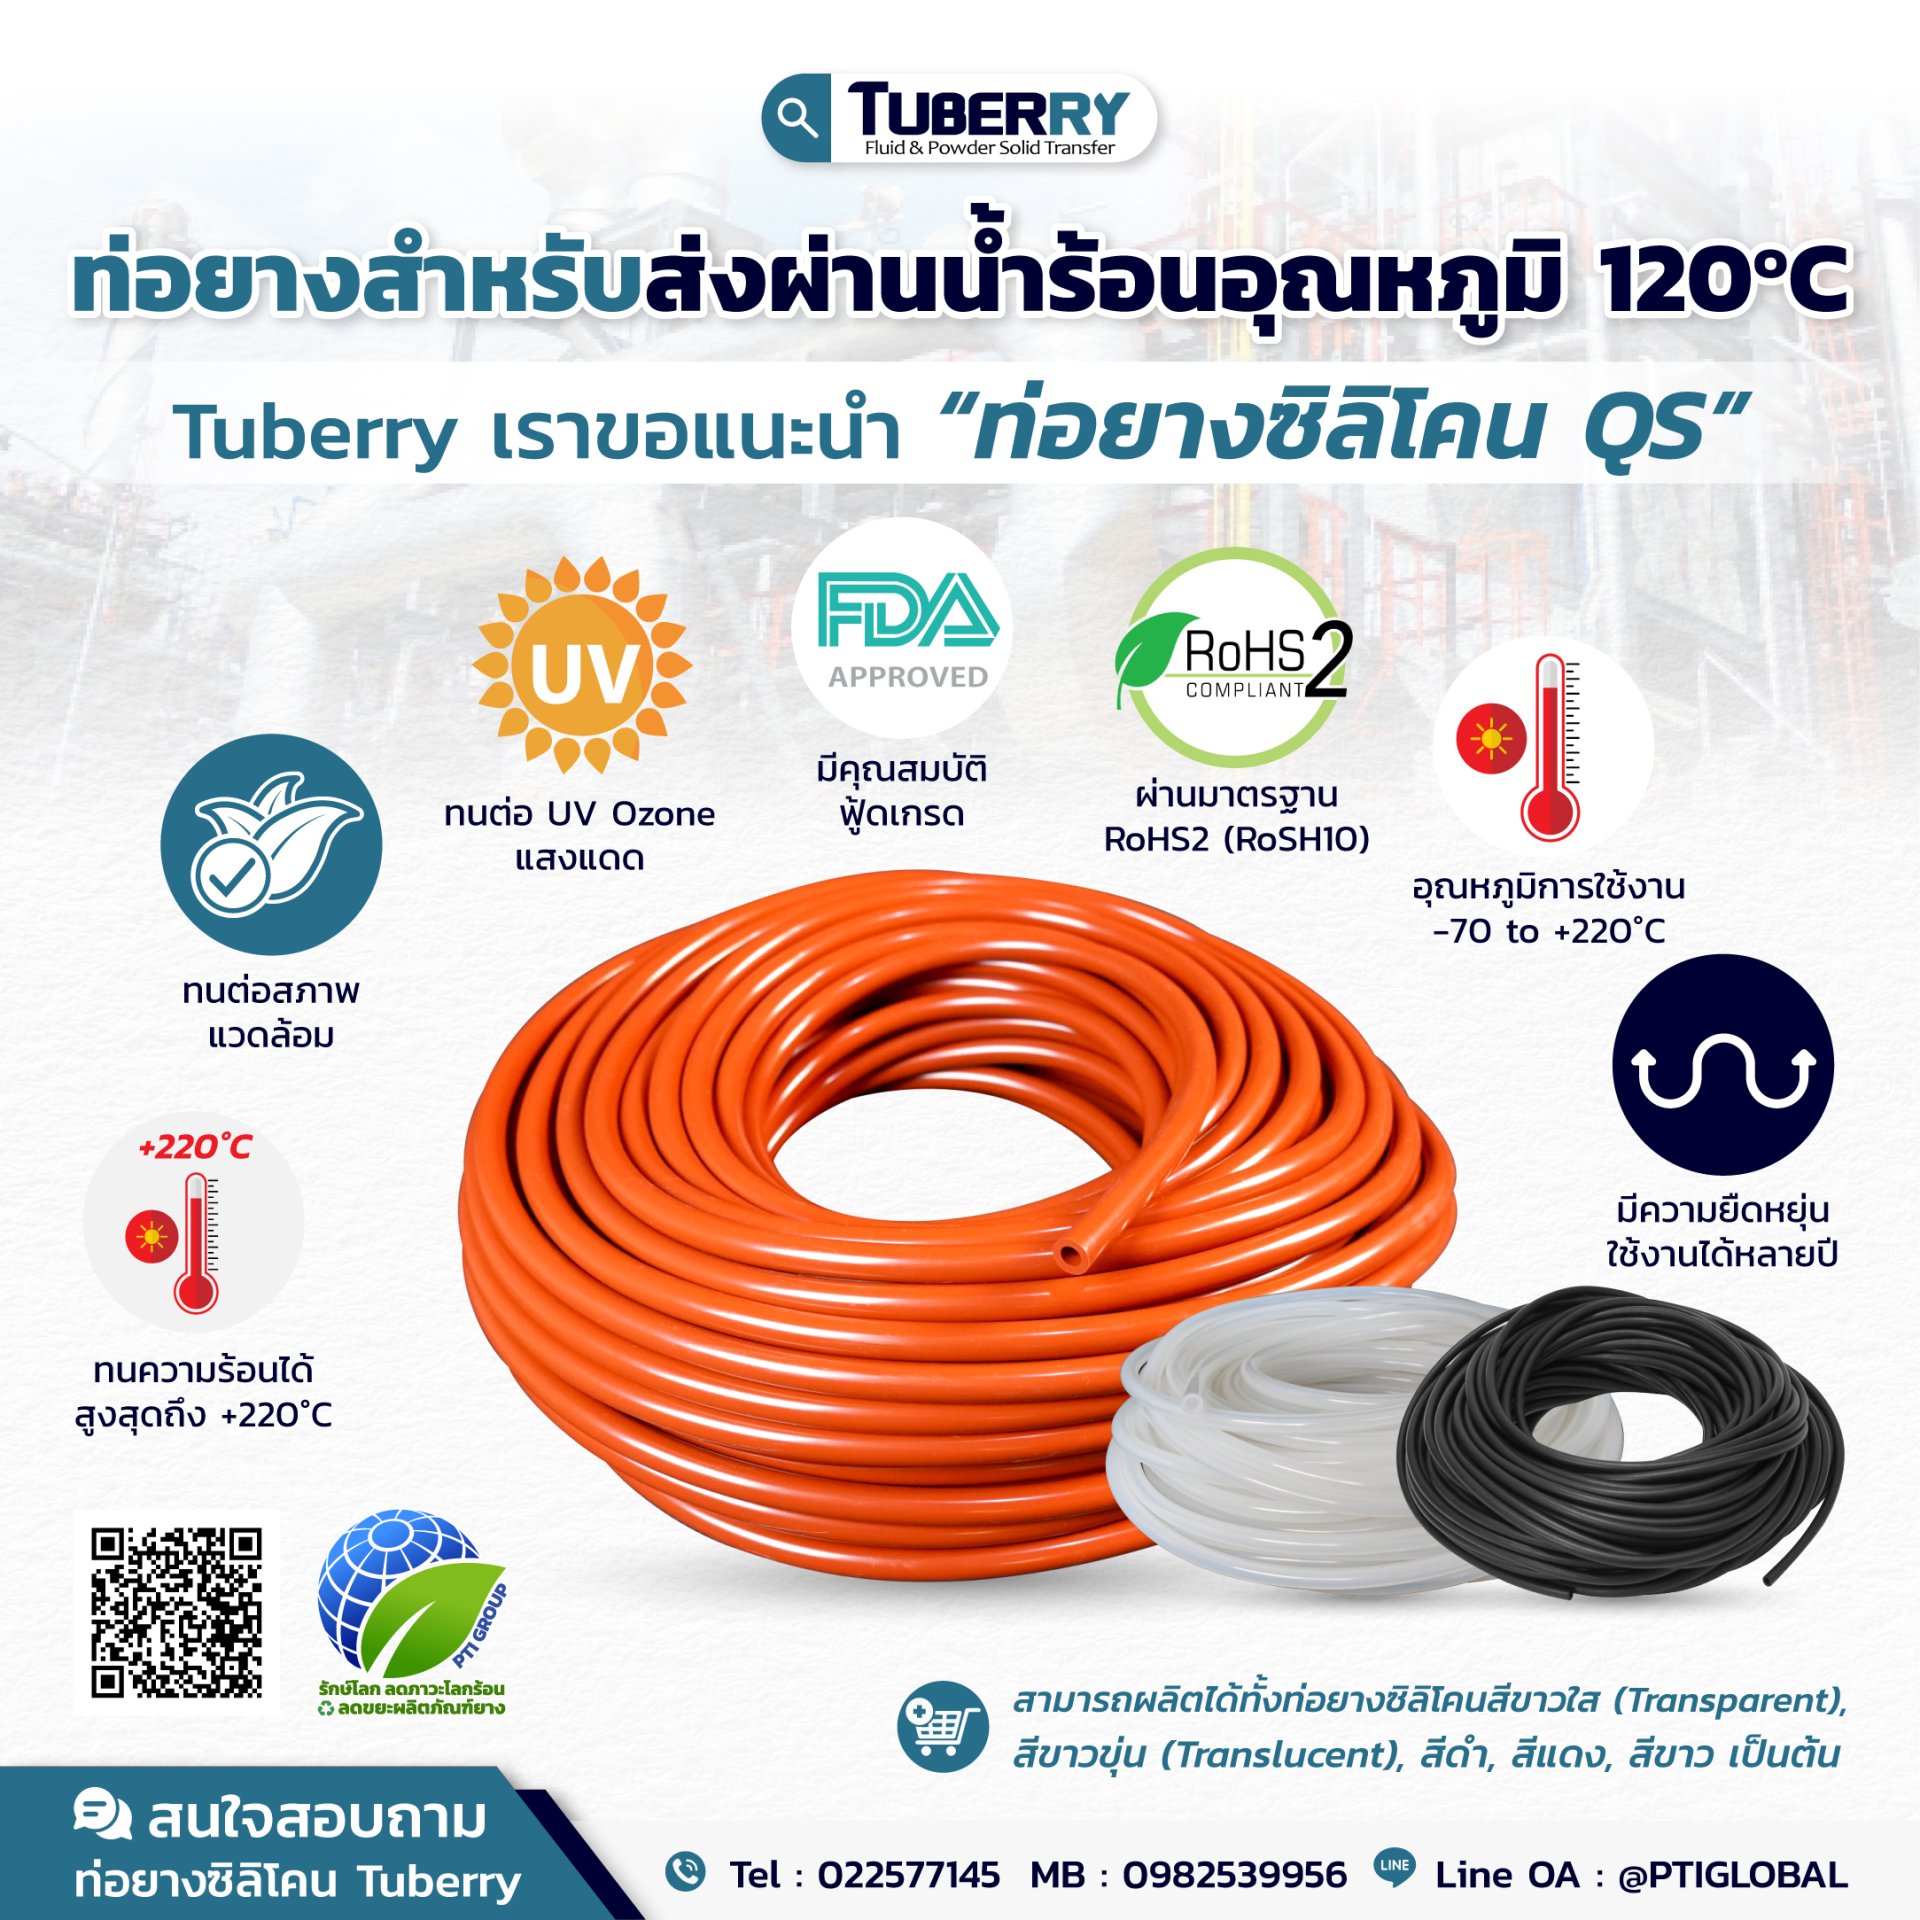 Rubber hose for transferring hot water up to 120°C